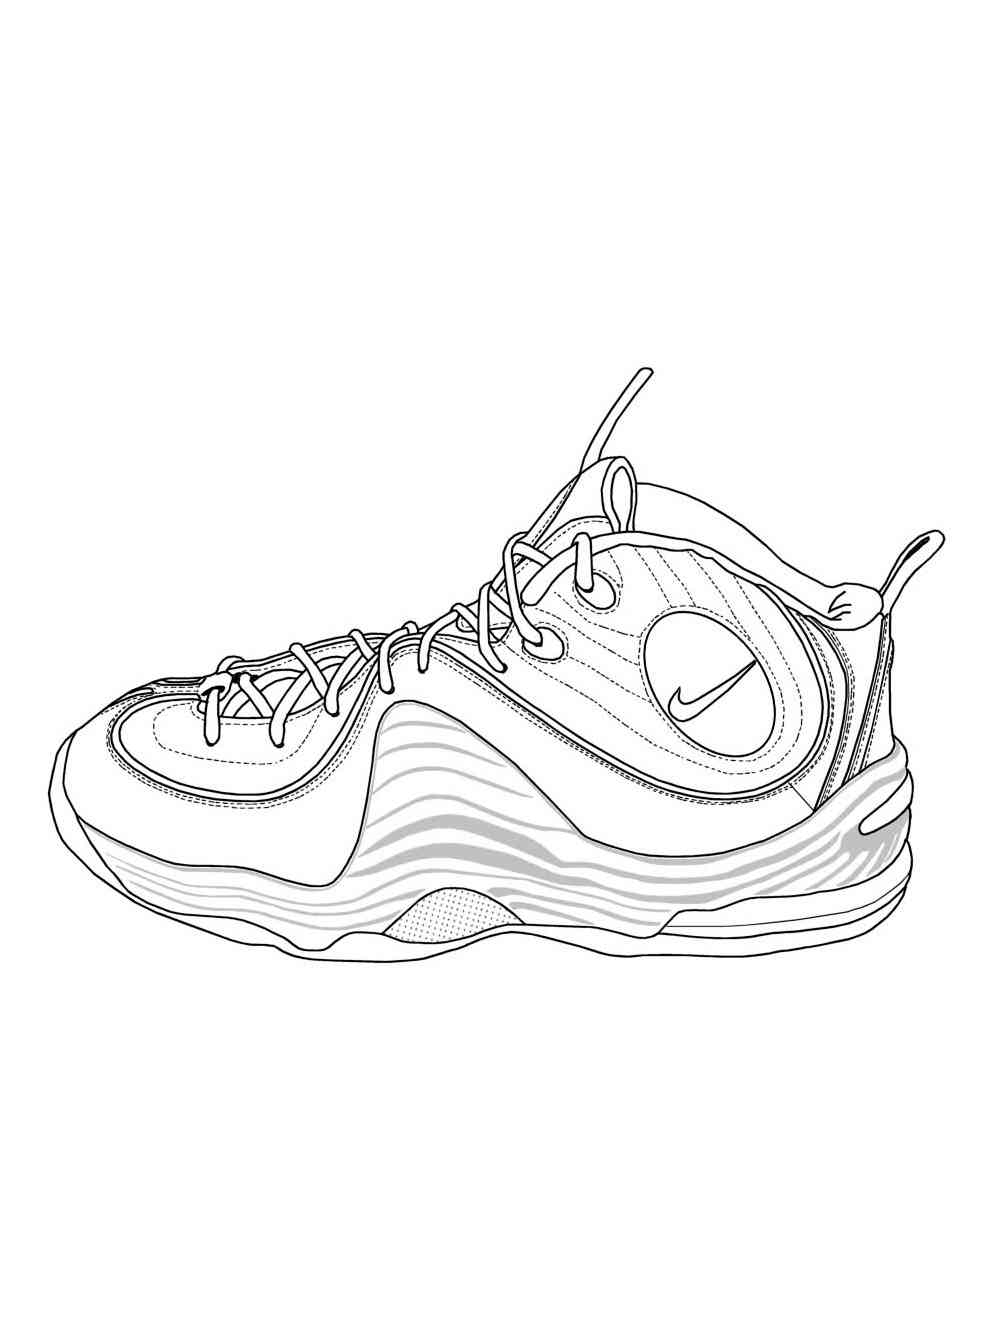 nike shoe outline coloring page